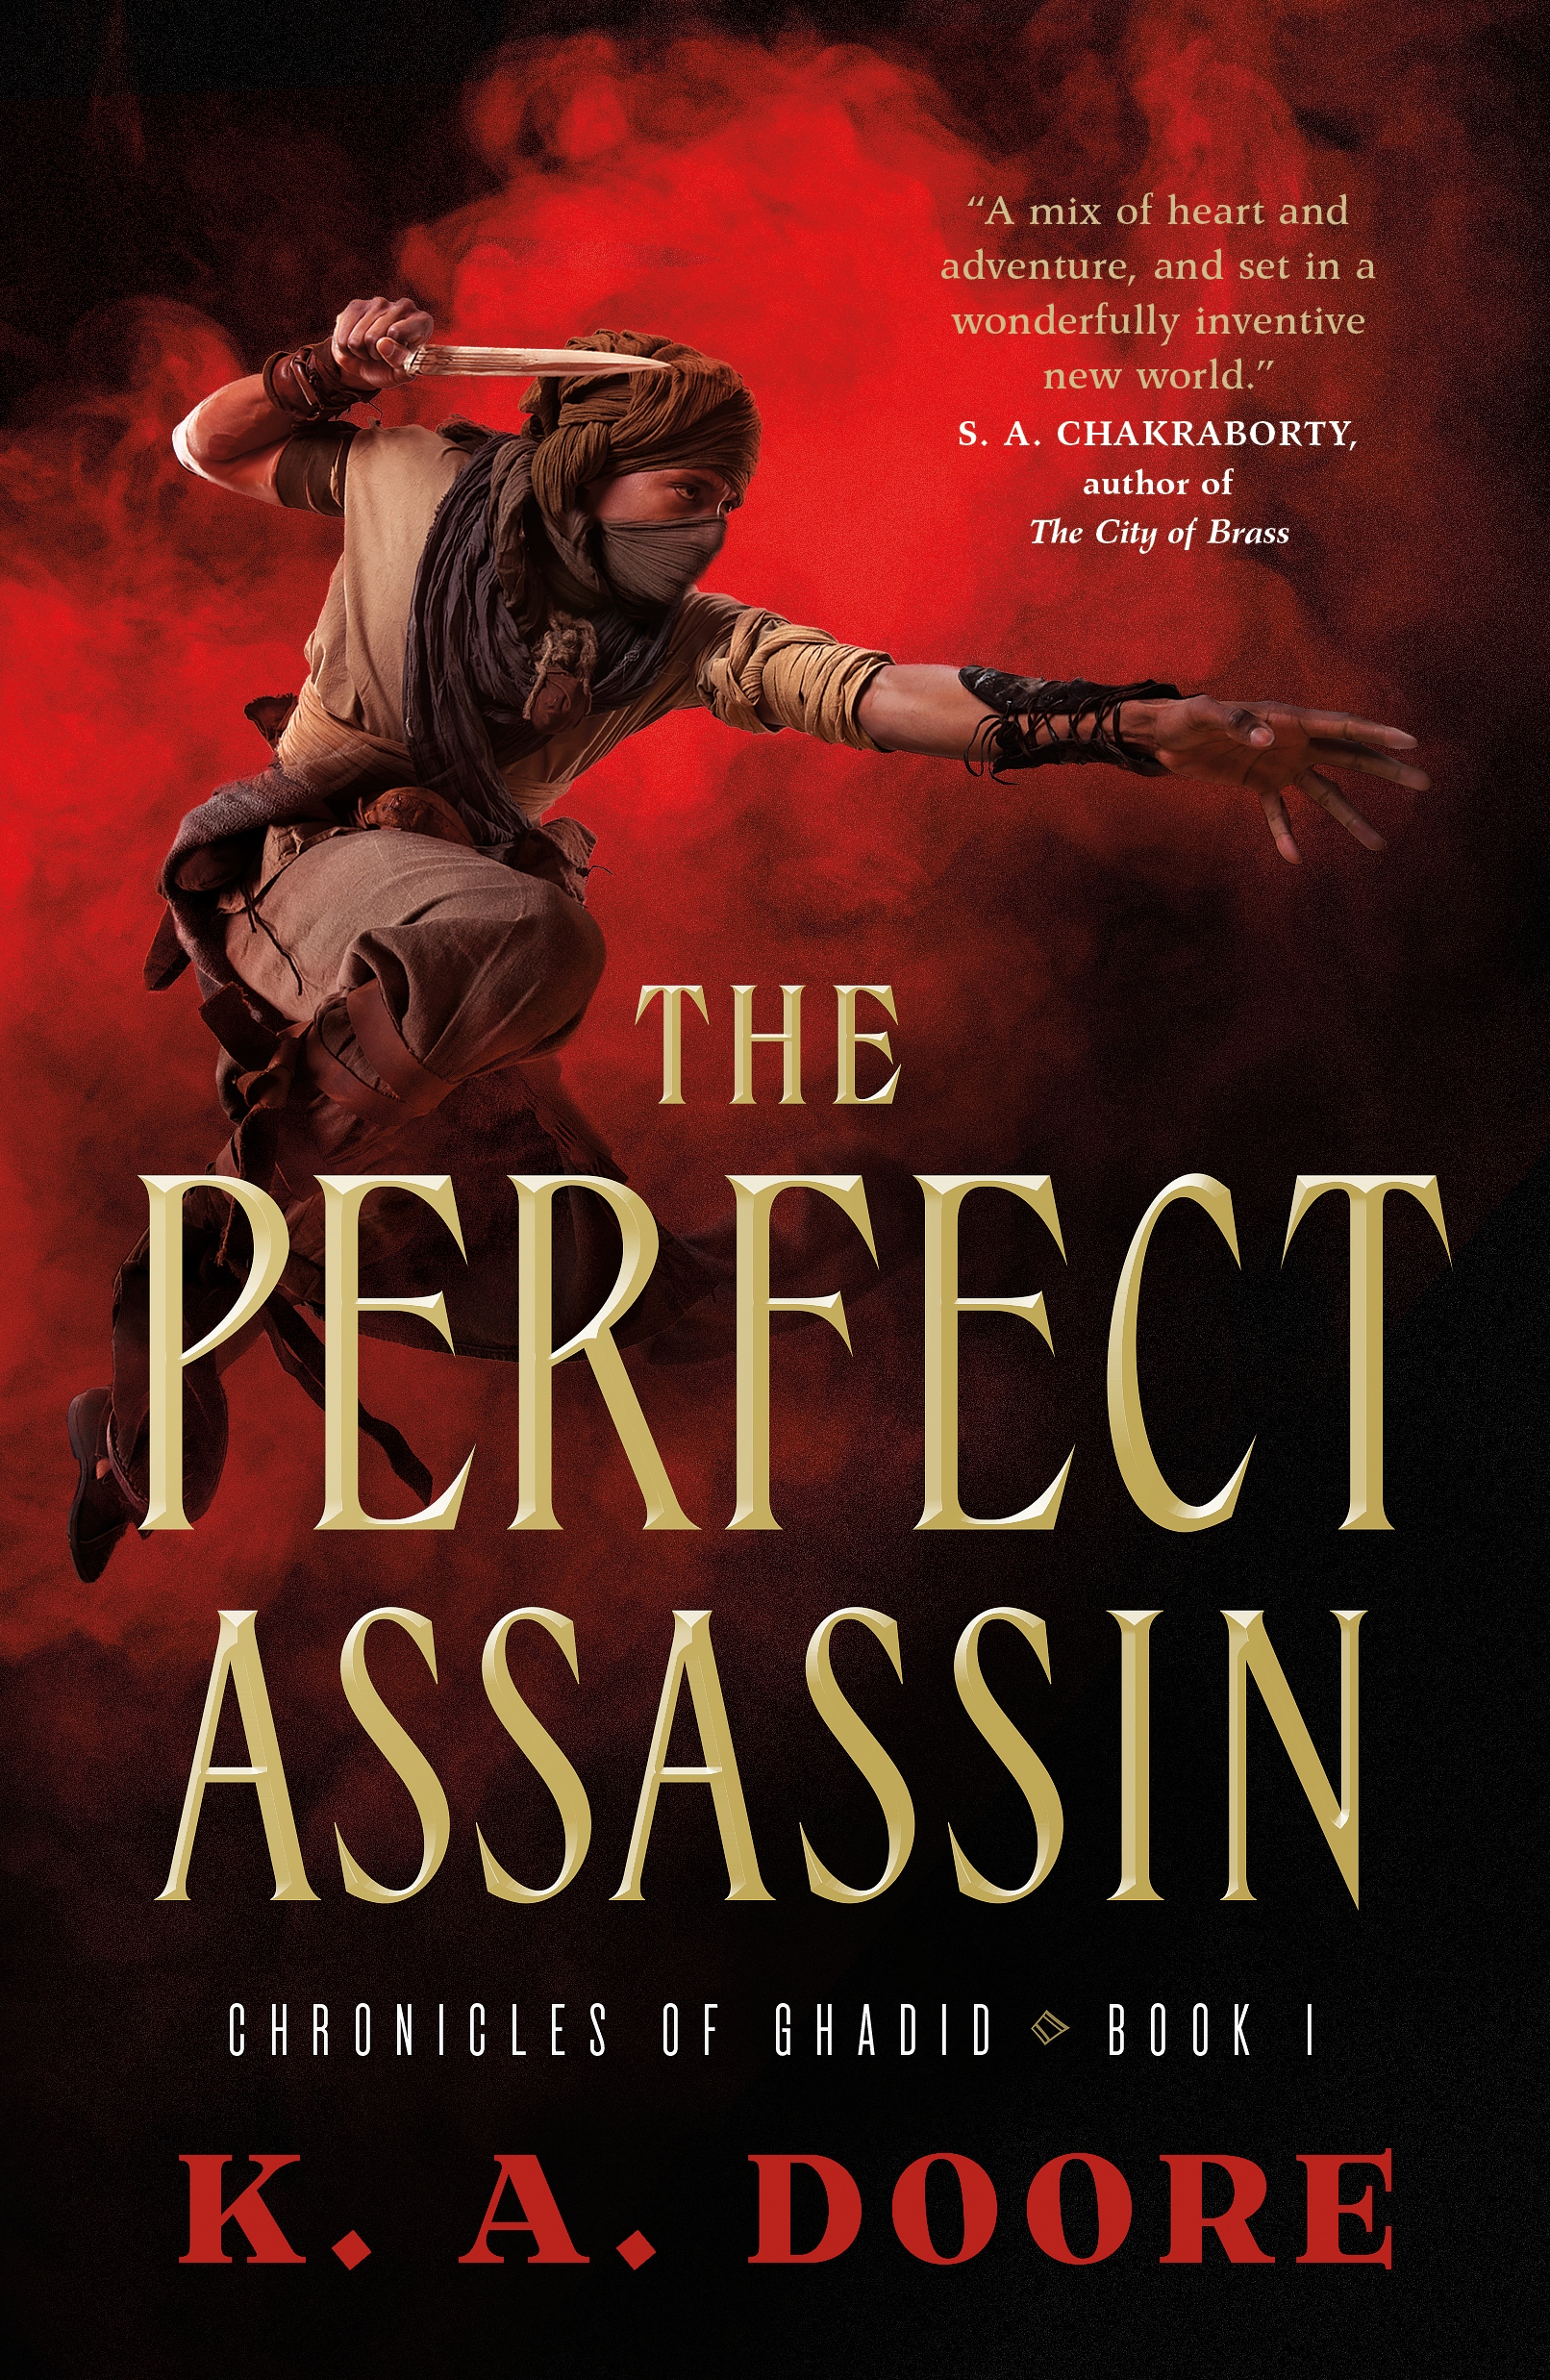 The Perfect Assassin : Book 1 in the Chronicles of Ghadid by K. A. Doore